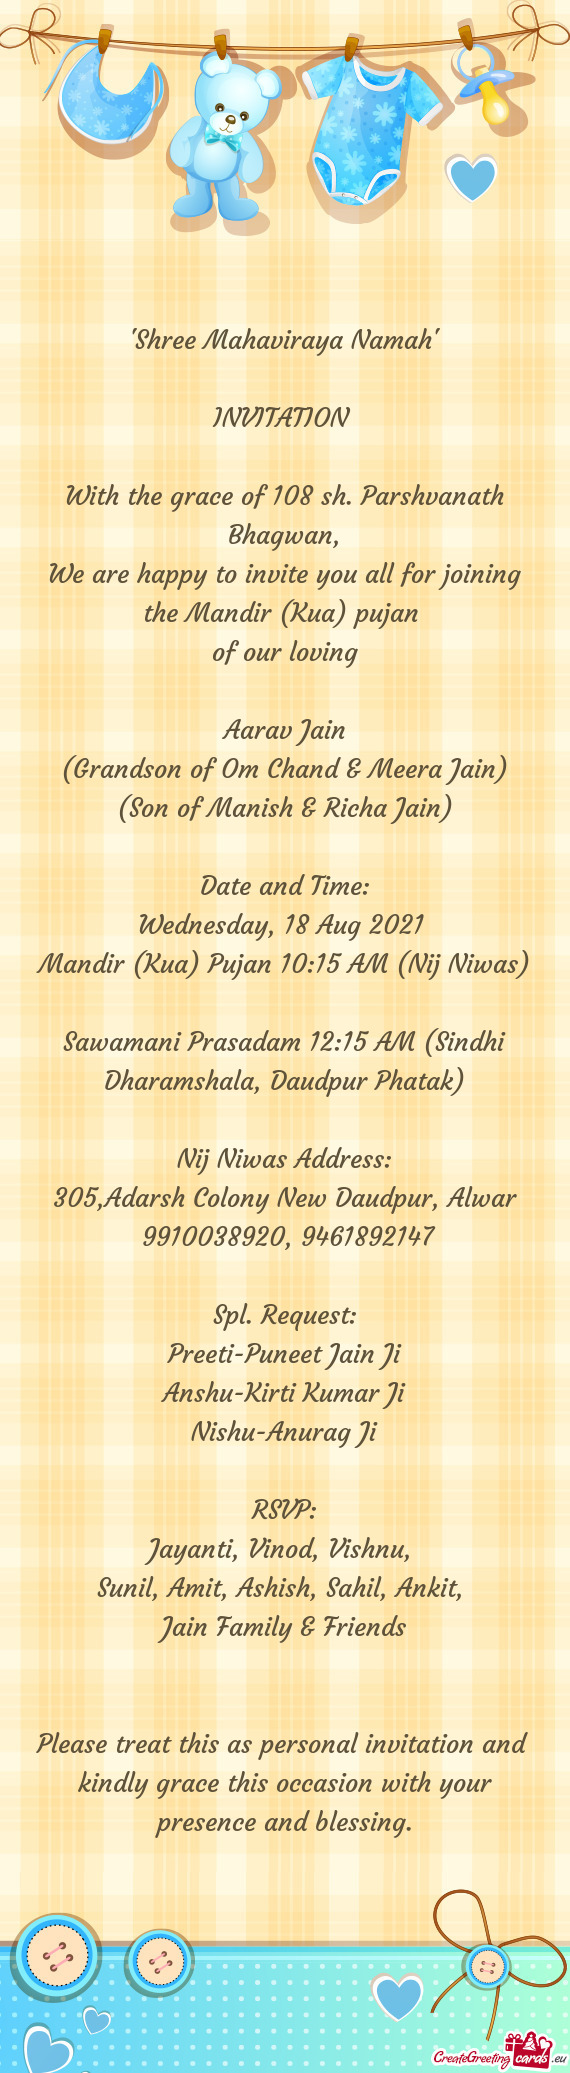 We are happy to invite you all for joining the Mandir (Kua) pujan